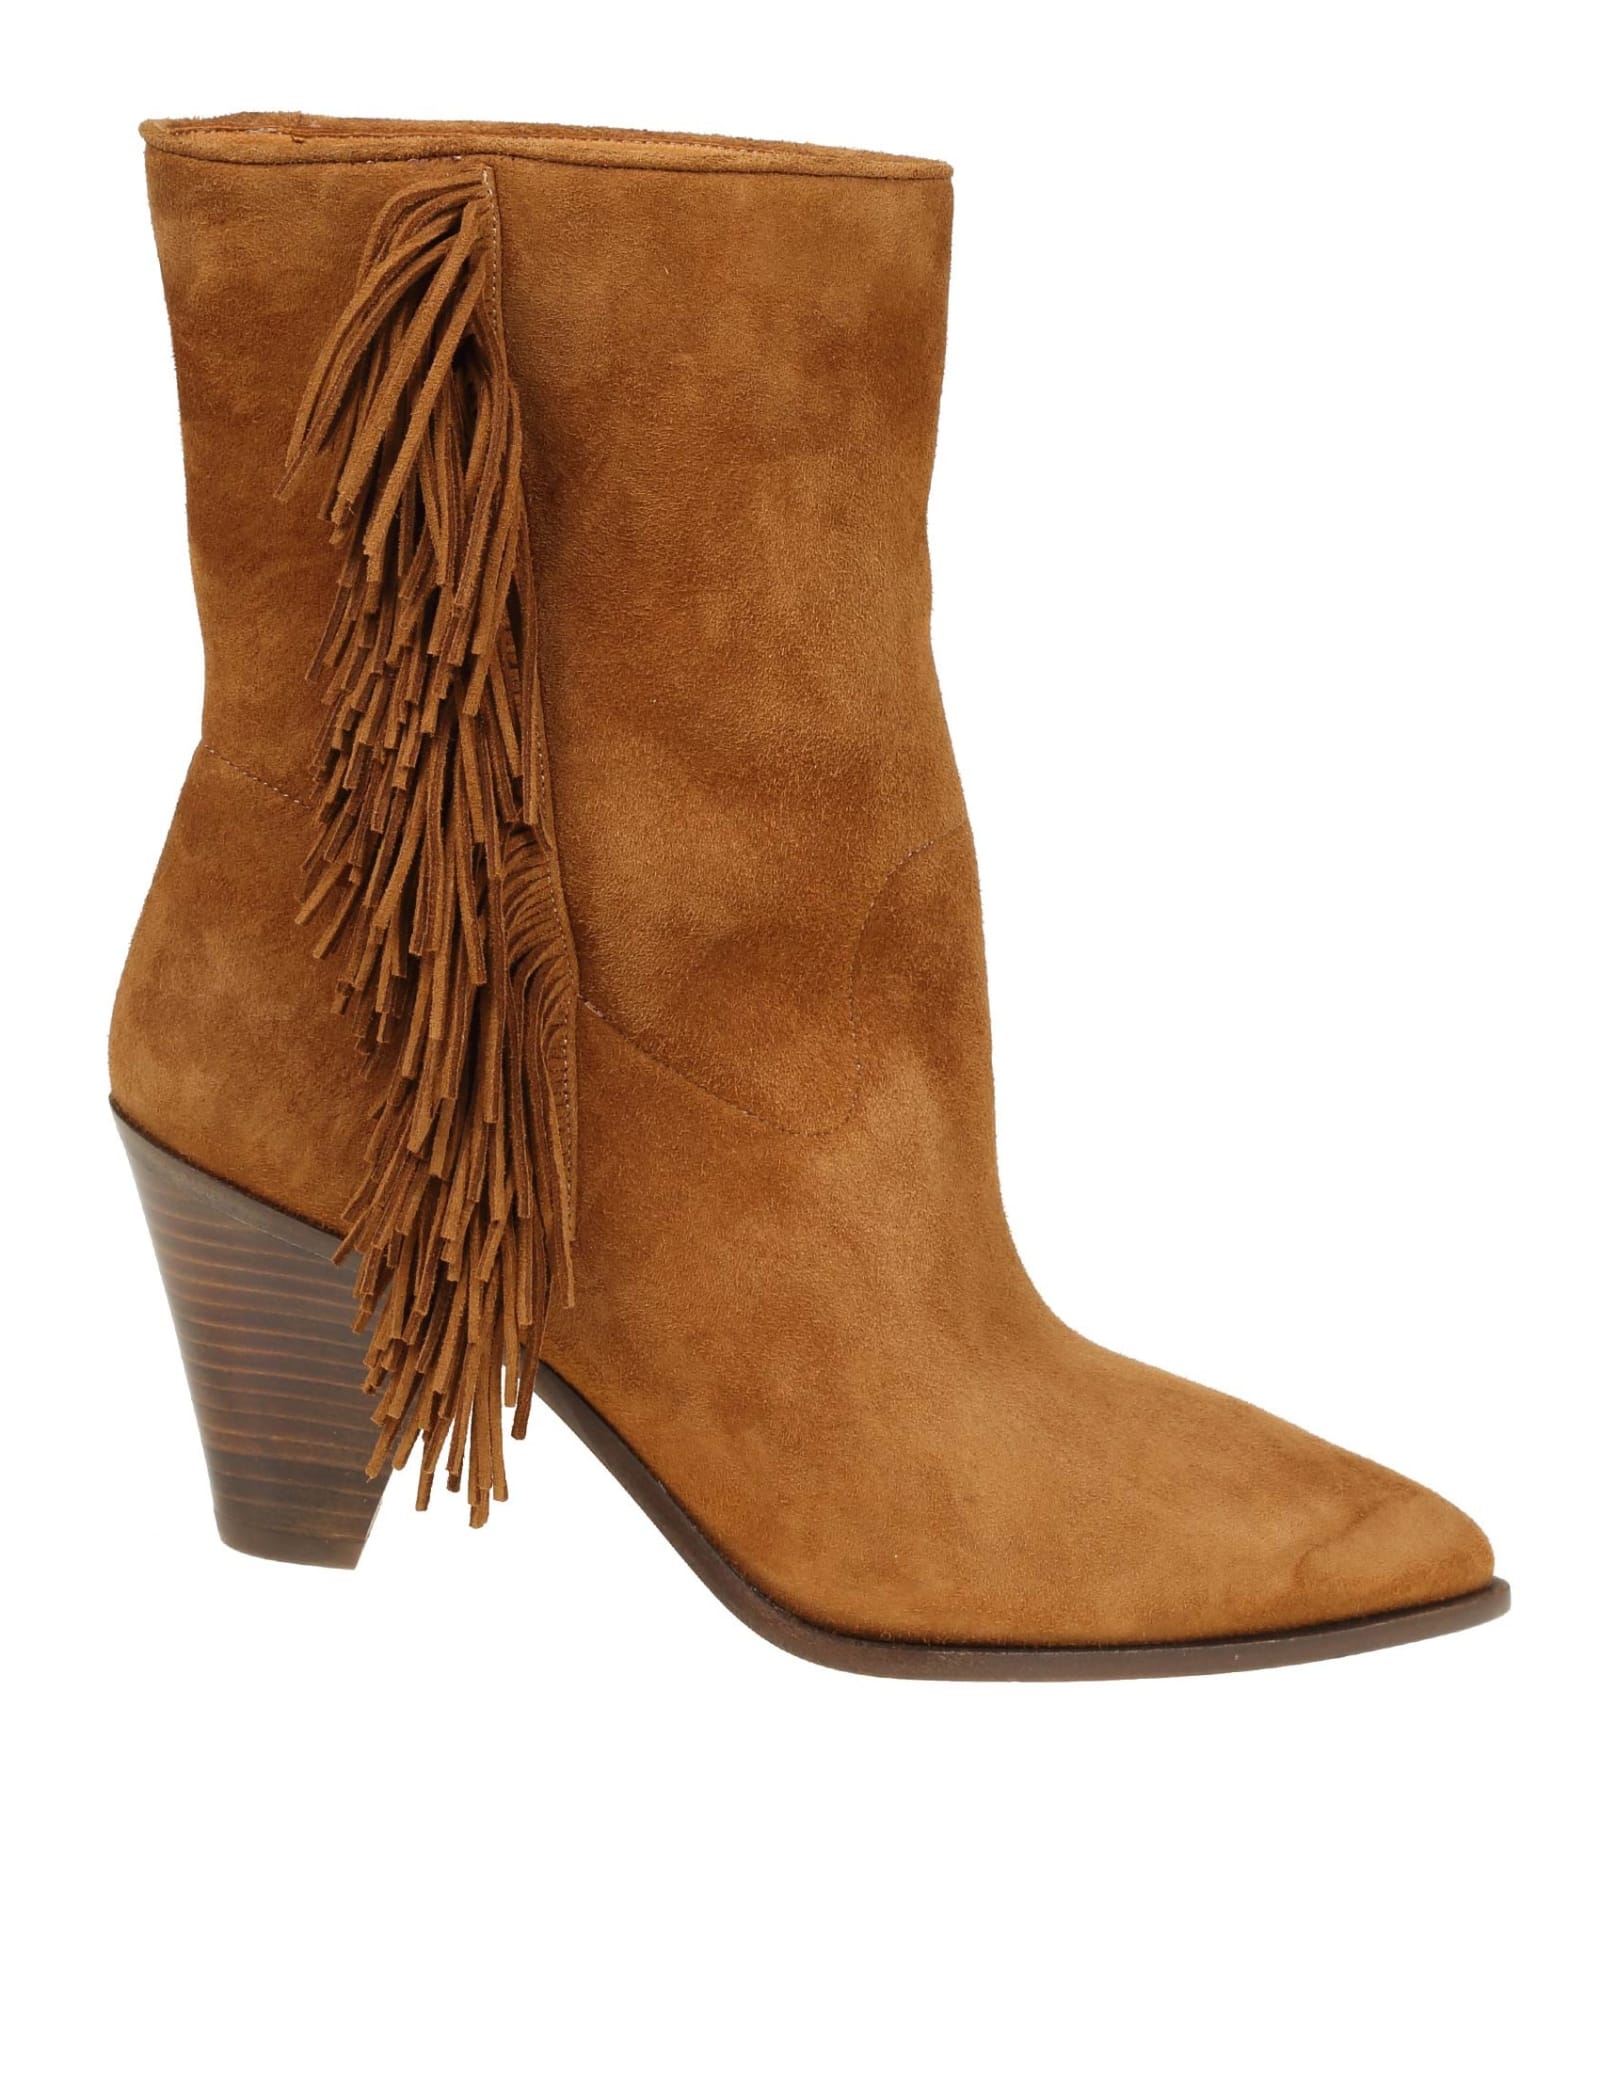 AQUAZZURA MARFA COWBOY ANKLE BOOTS IN SUEDE LEATHER